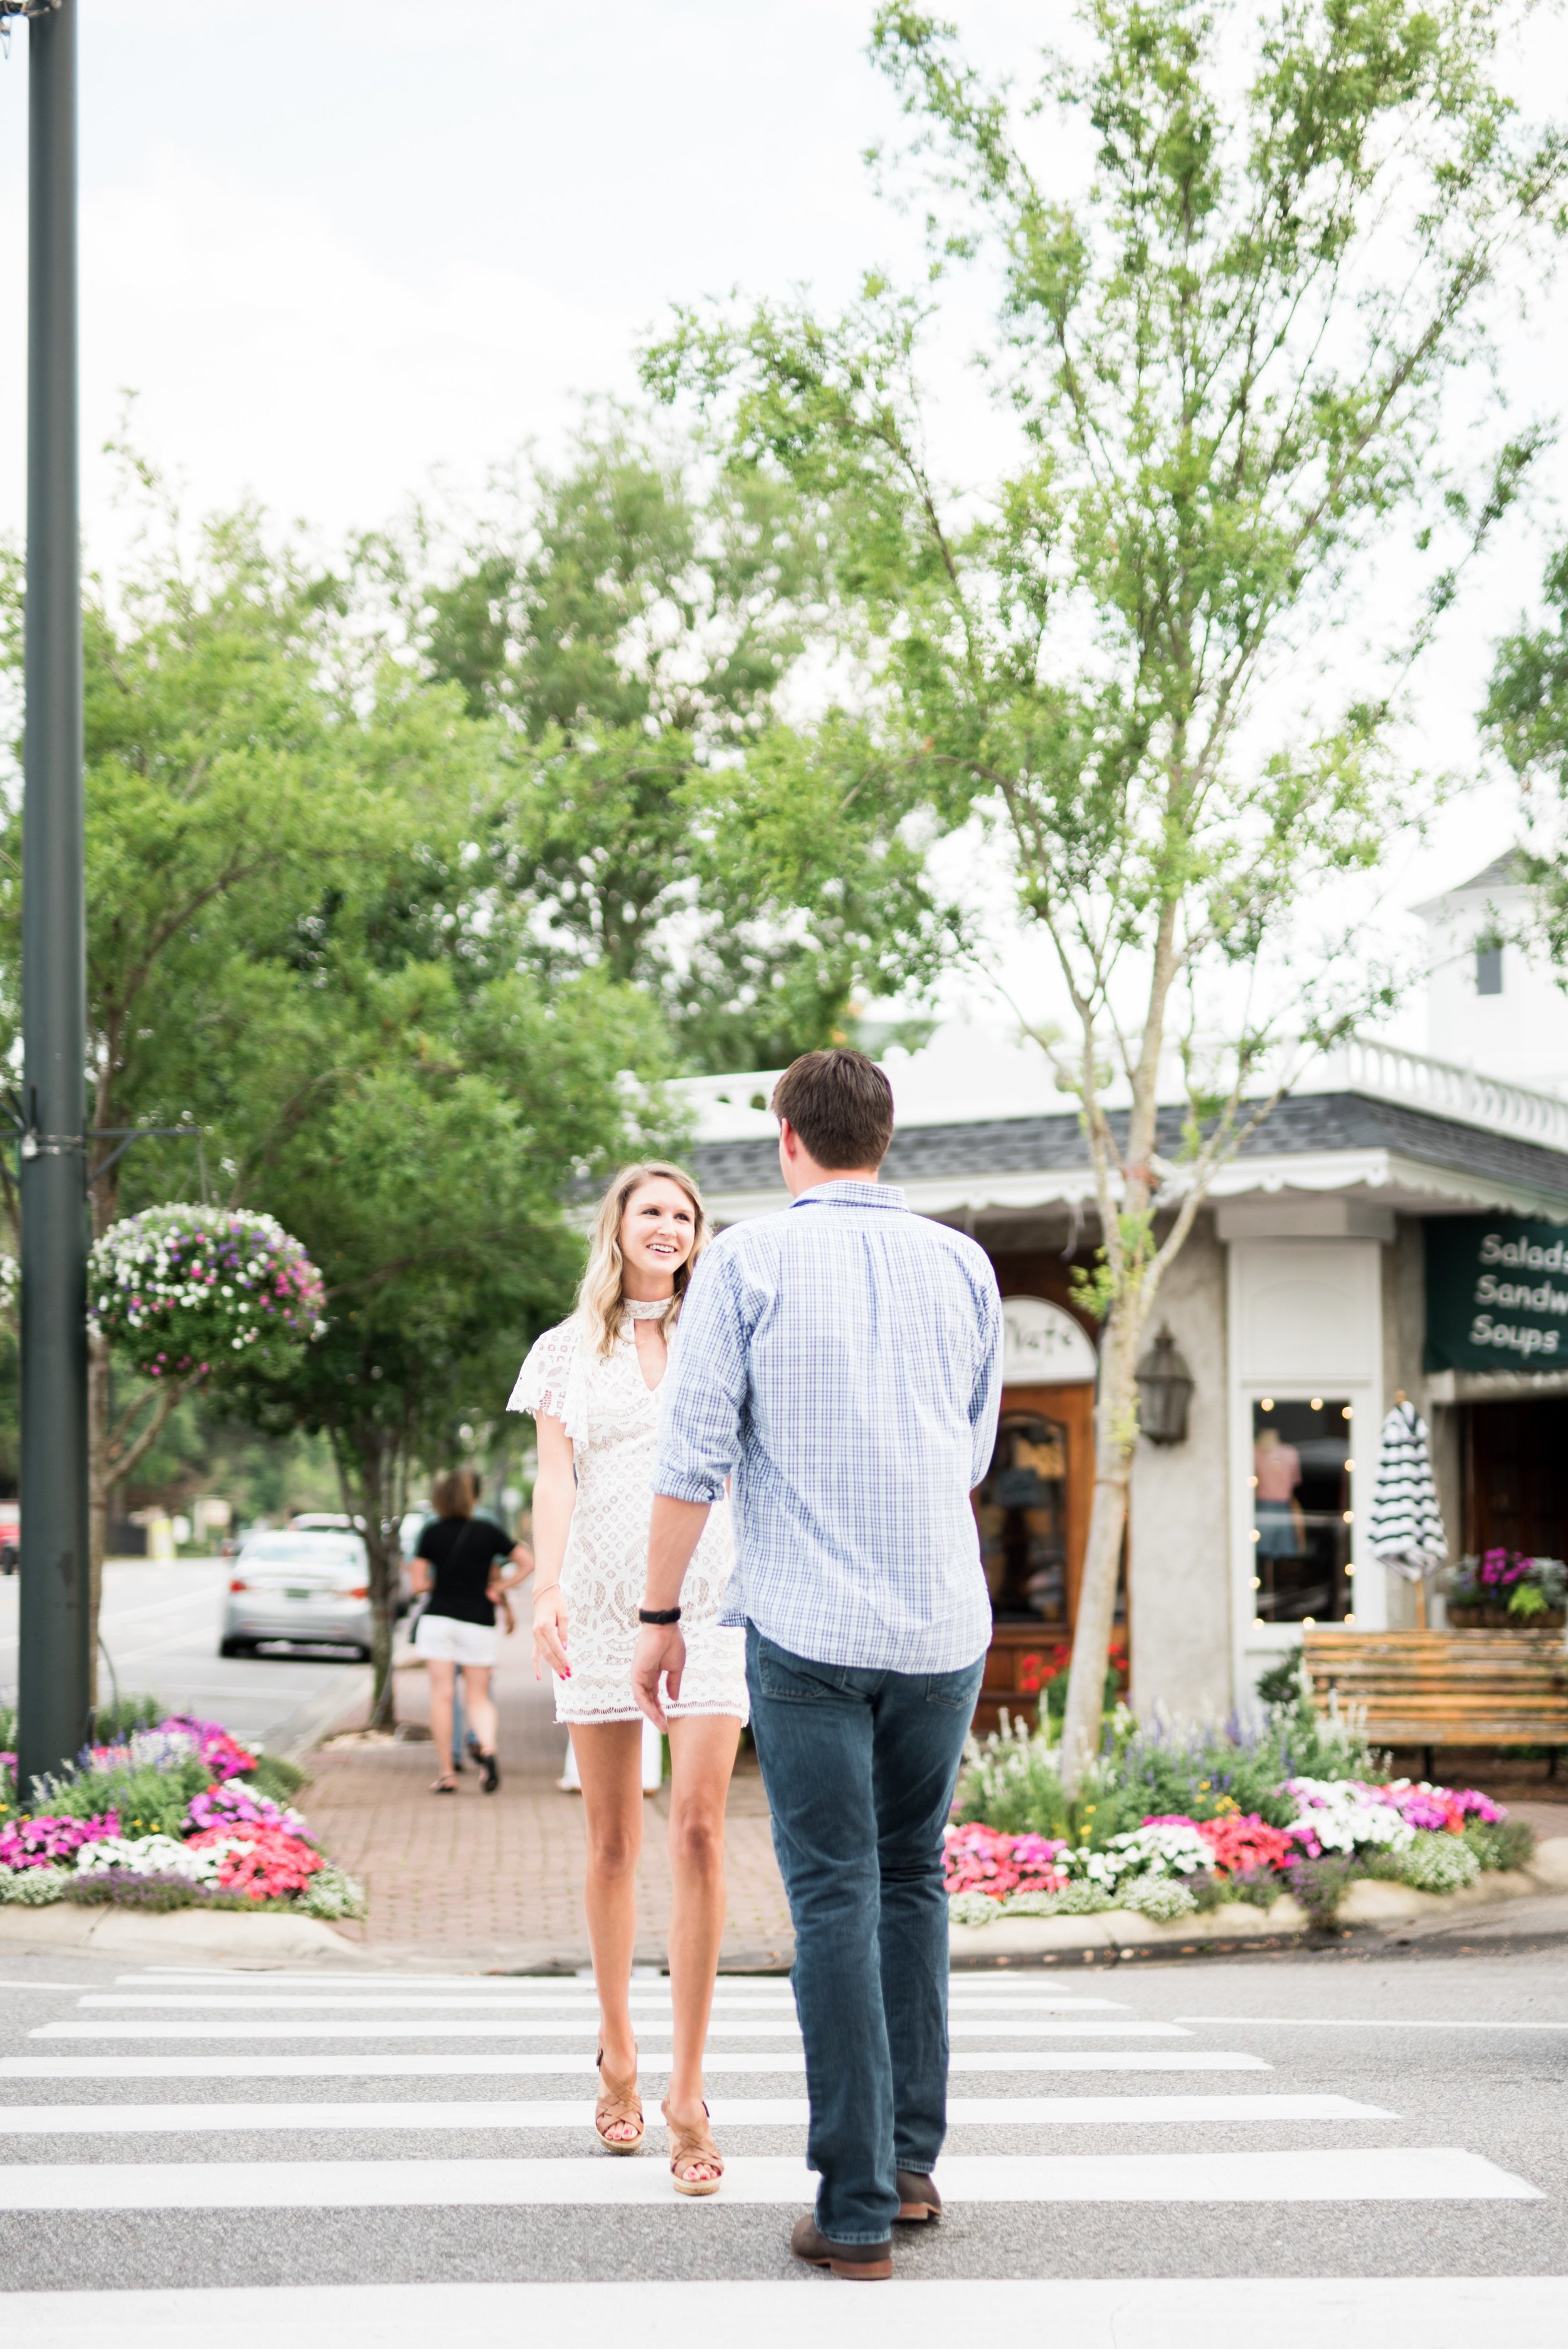 Engagement Session in Downtown Fairhope by Kristen Grubb Photography